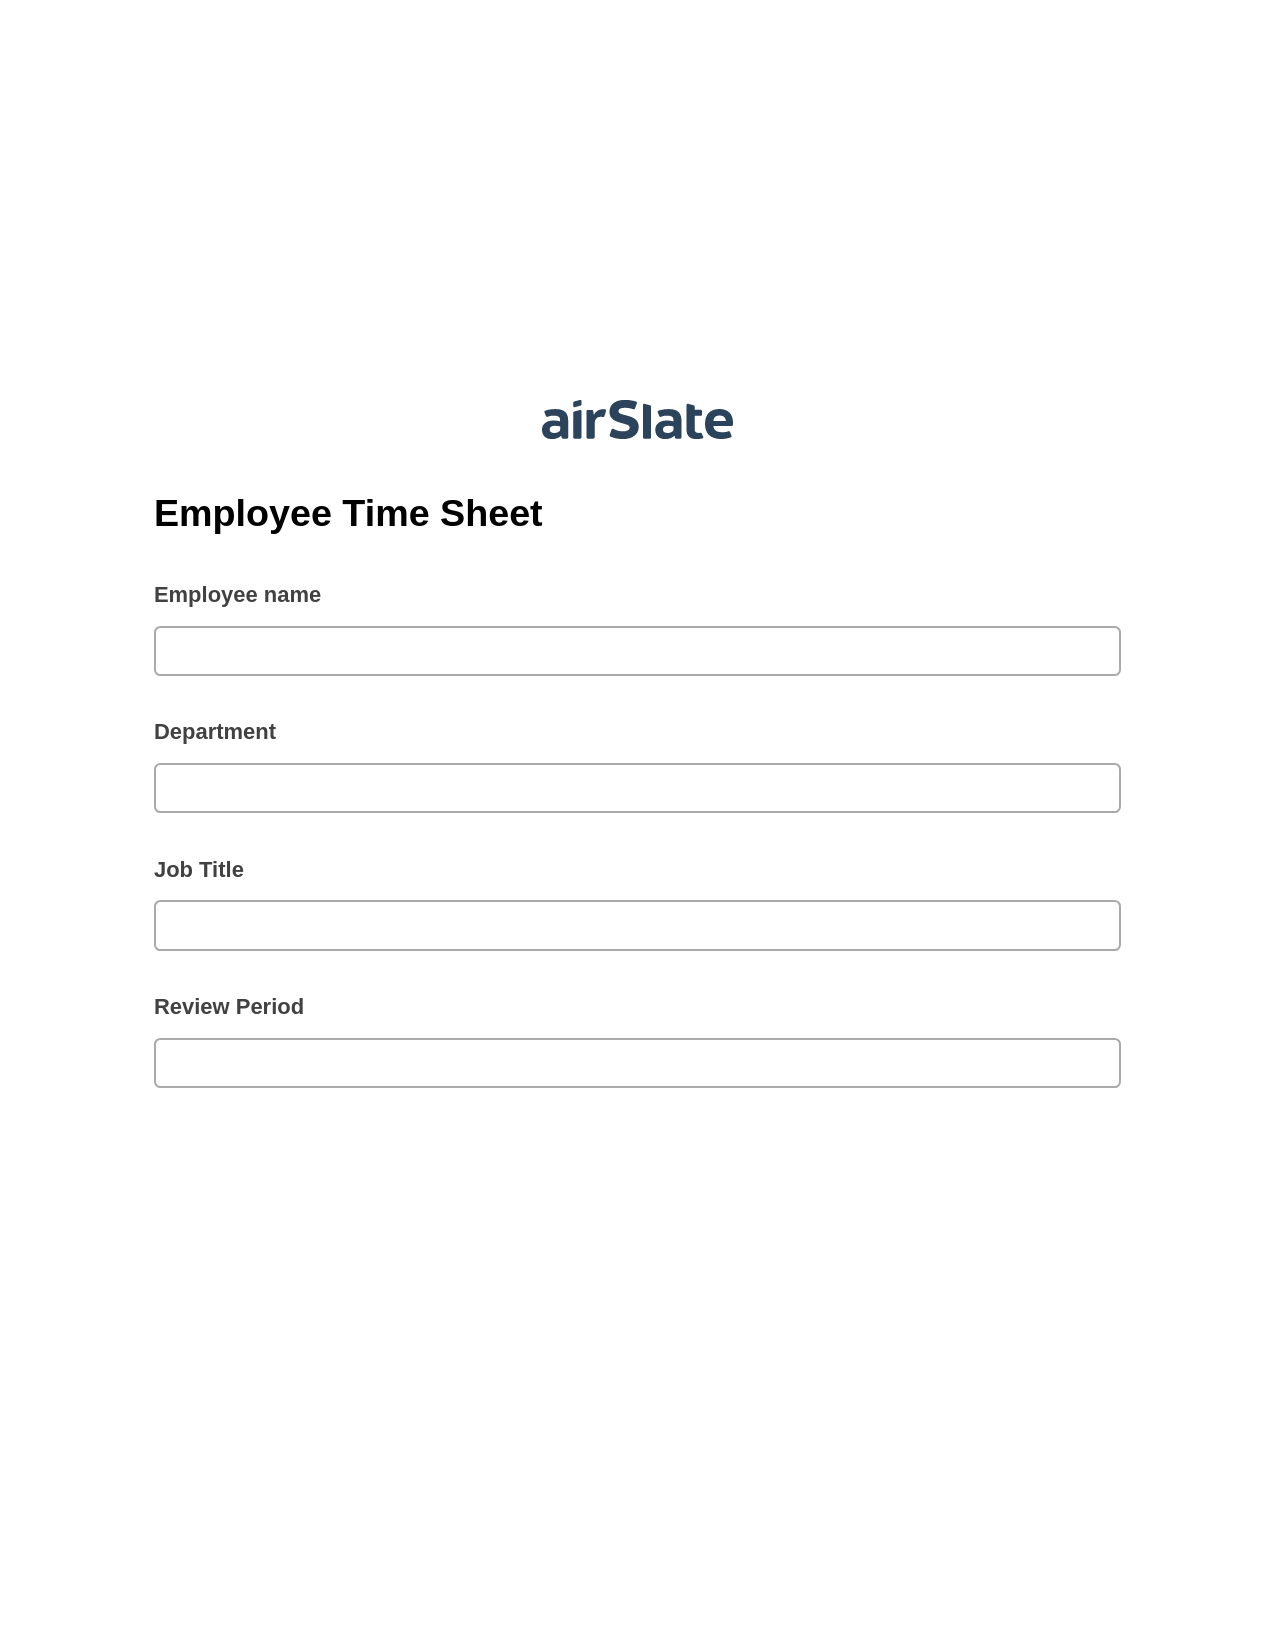 Employee Time Sheet Pre-fill Dropdowns from Airtable, Update Audit Trail Bot, Export to NetSuite Bot